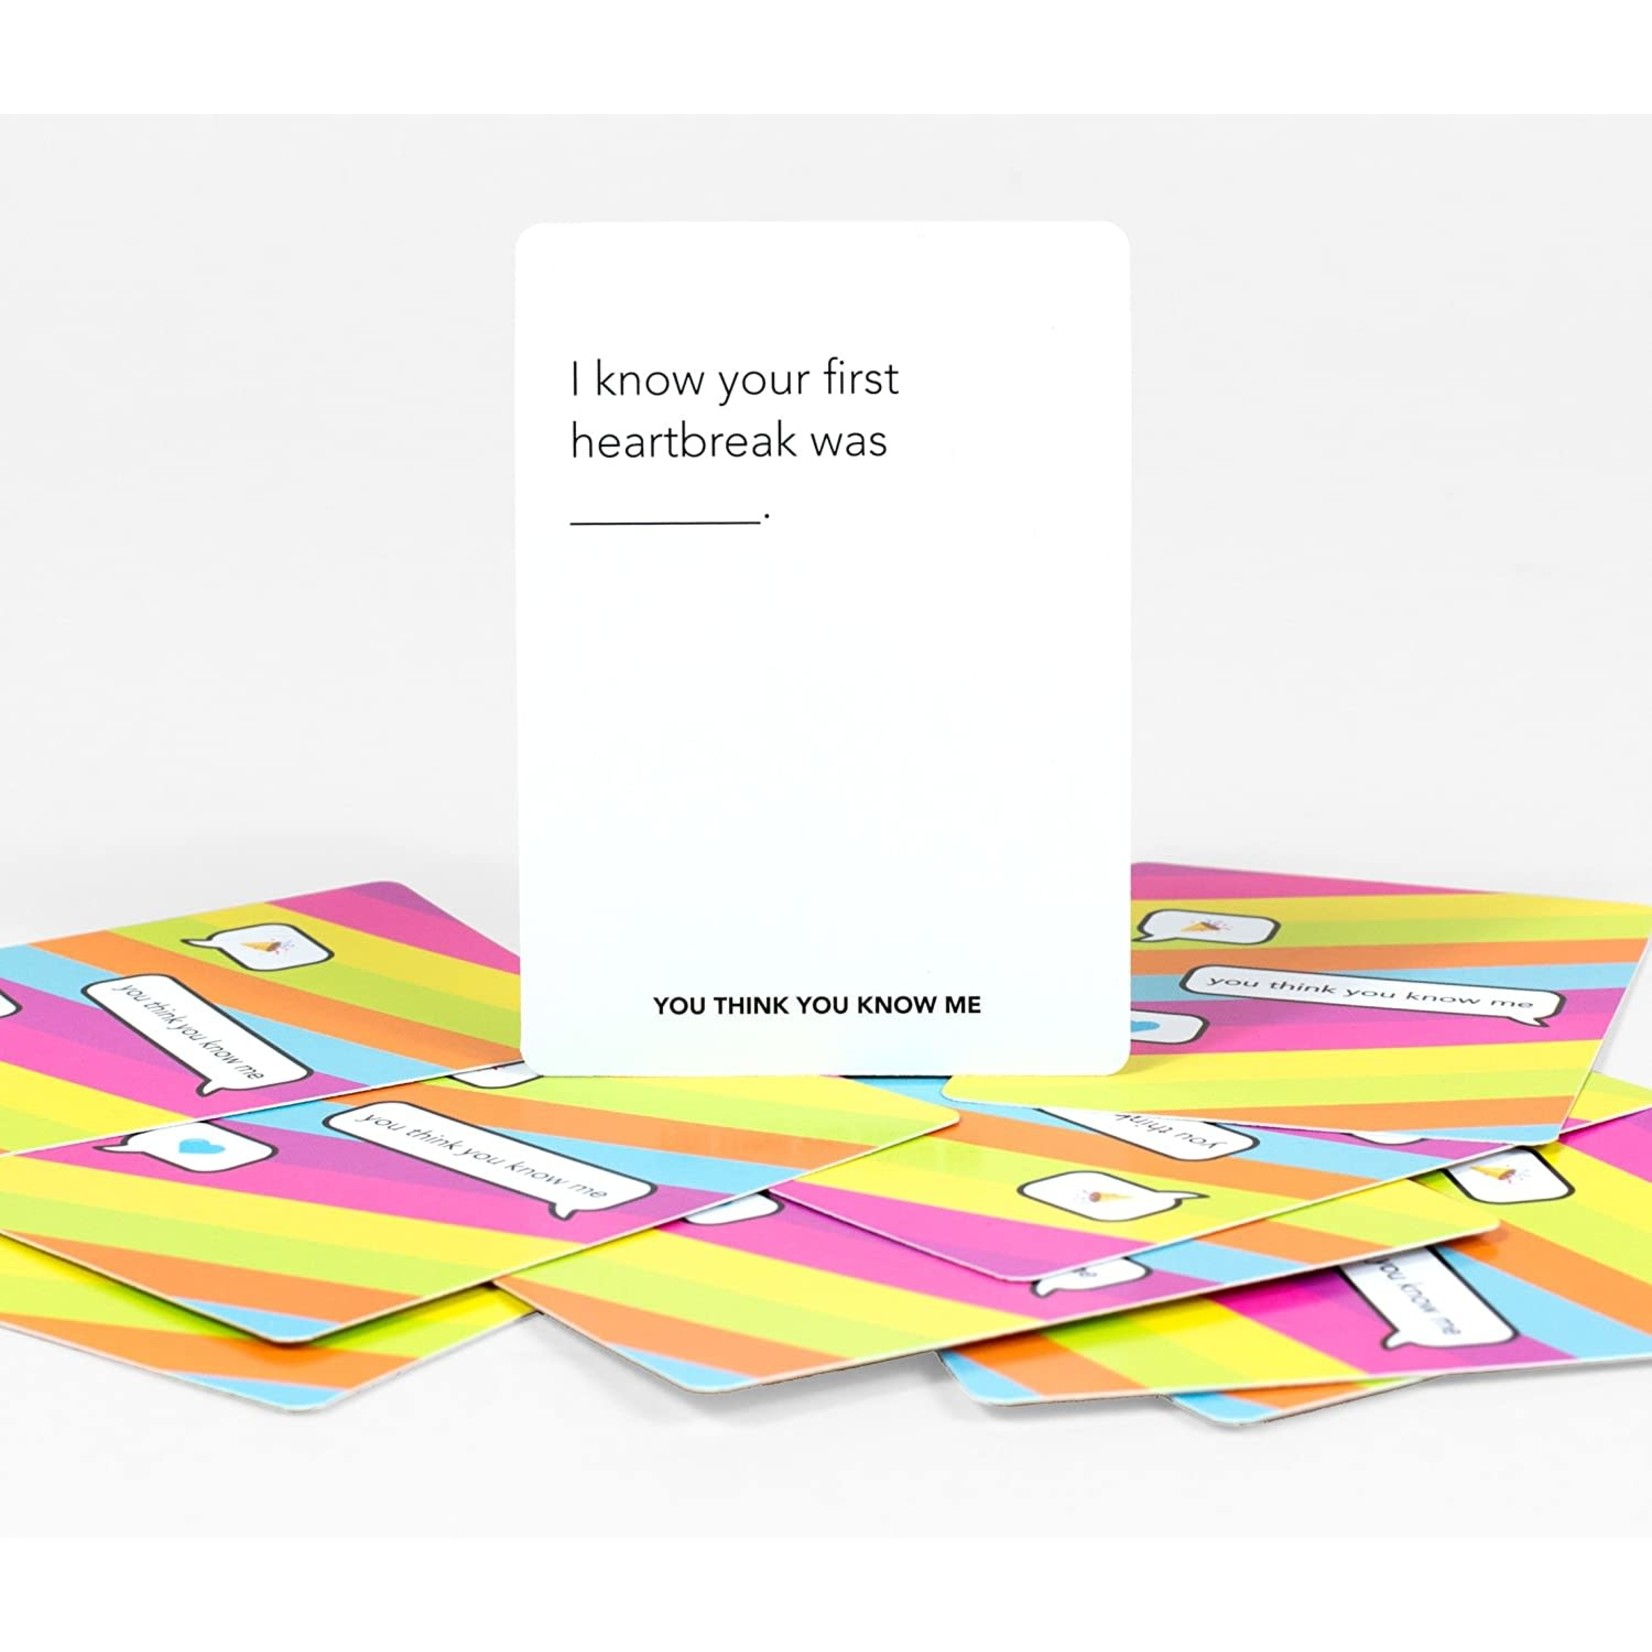 Pink Tiger Games You Think You Know Me: A Conversational Card Game